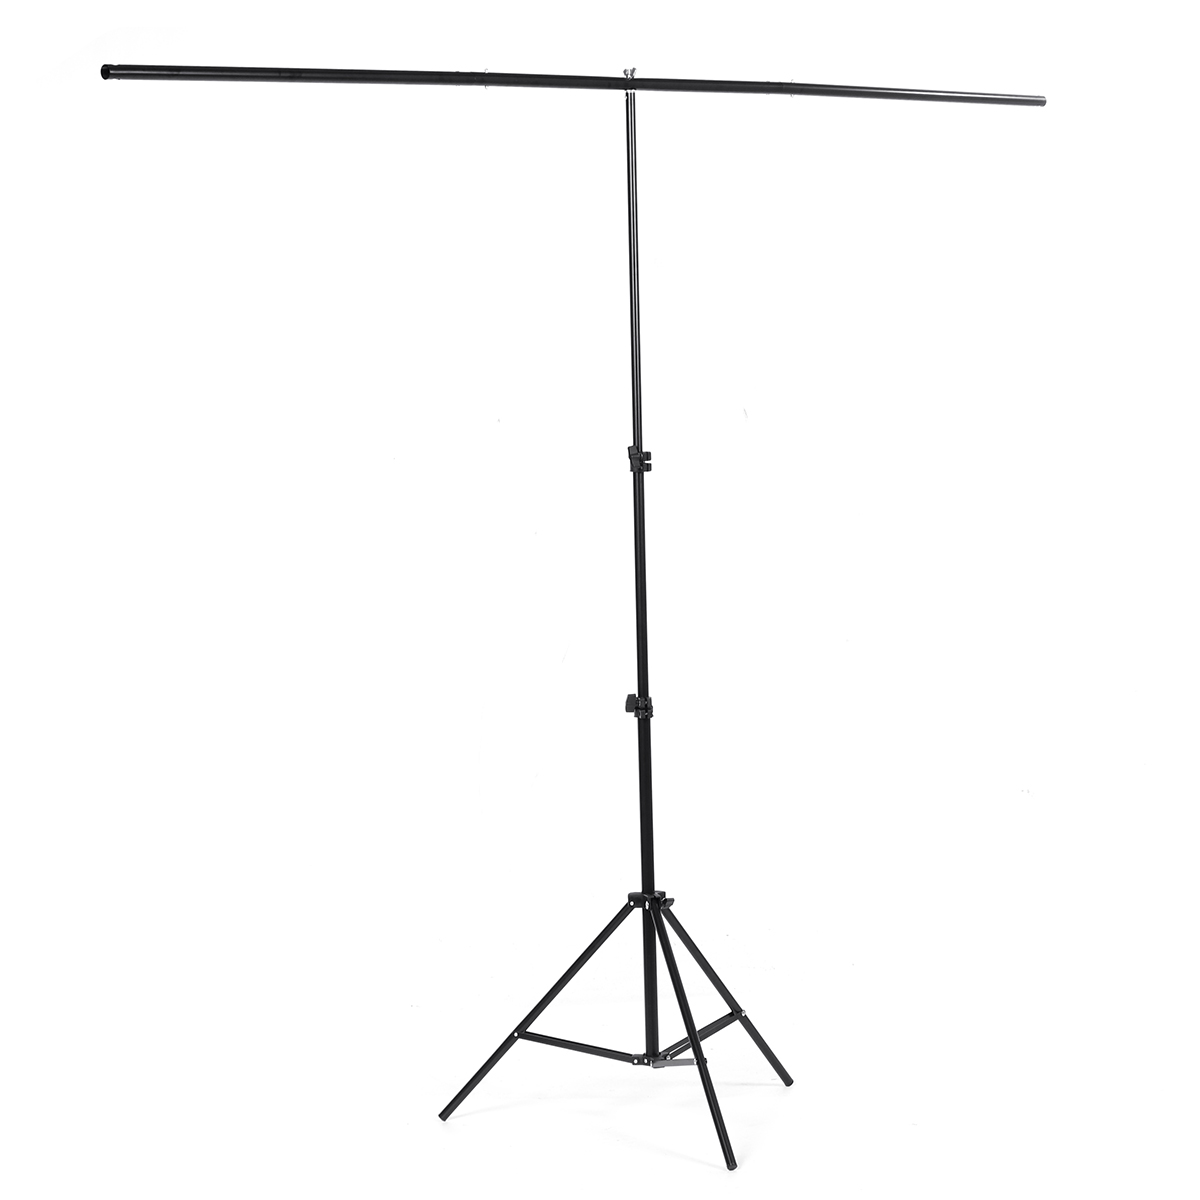 Photography-Studio-Heavy-Duty-Backdrop-Stand-Screen-Background-Support-Stand-Kit-1748931